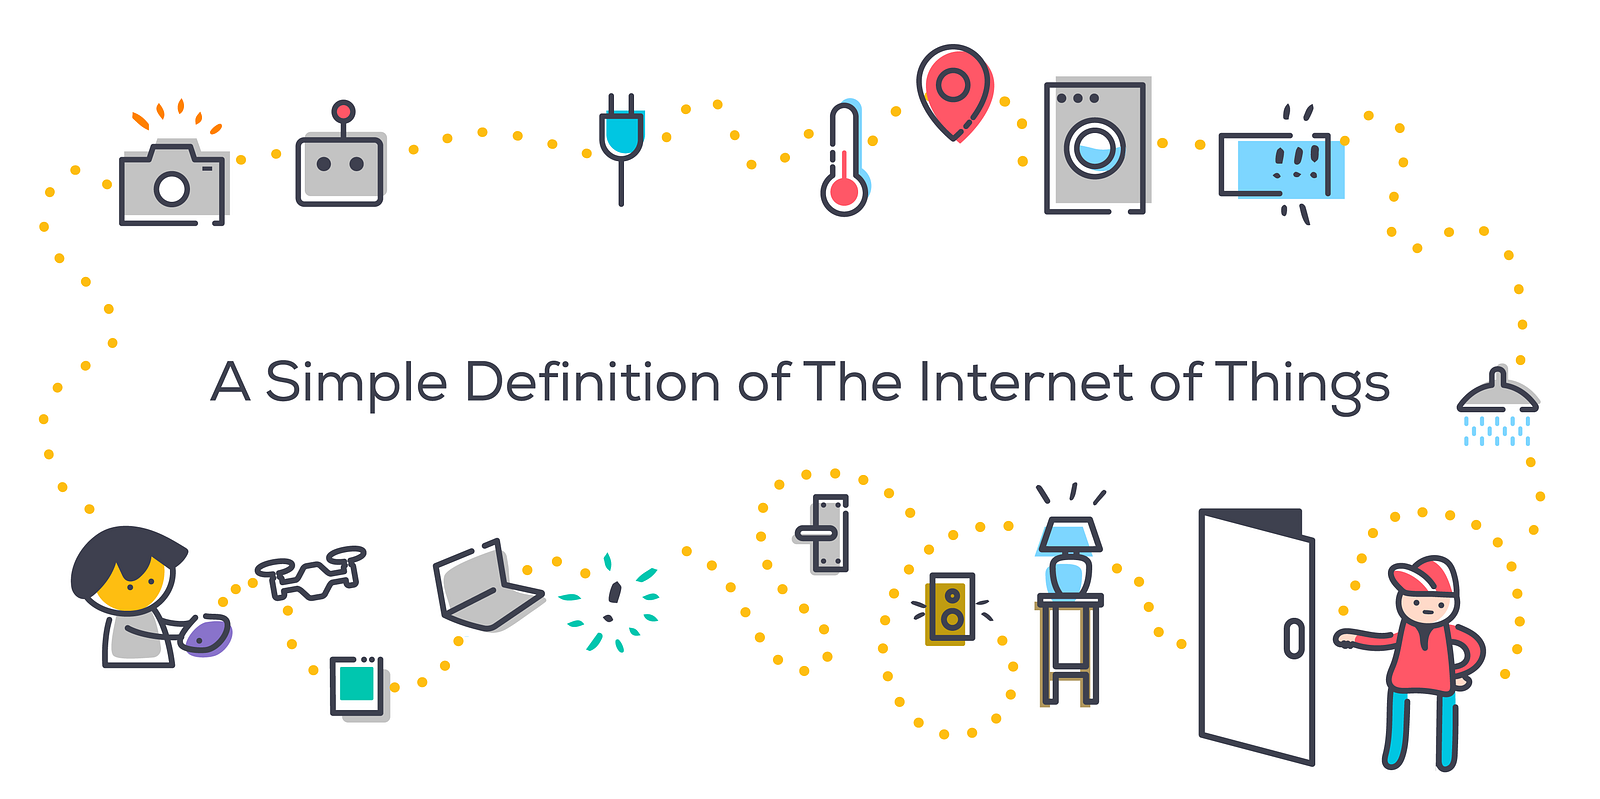 a brief definition of the internet of things (and what's wrong with it)